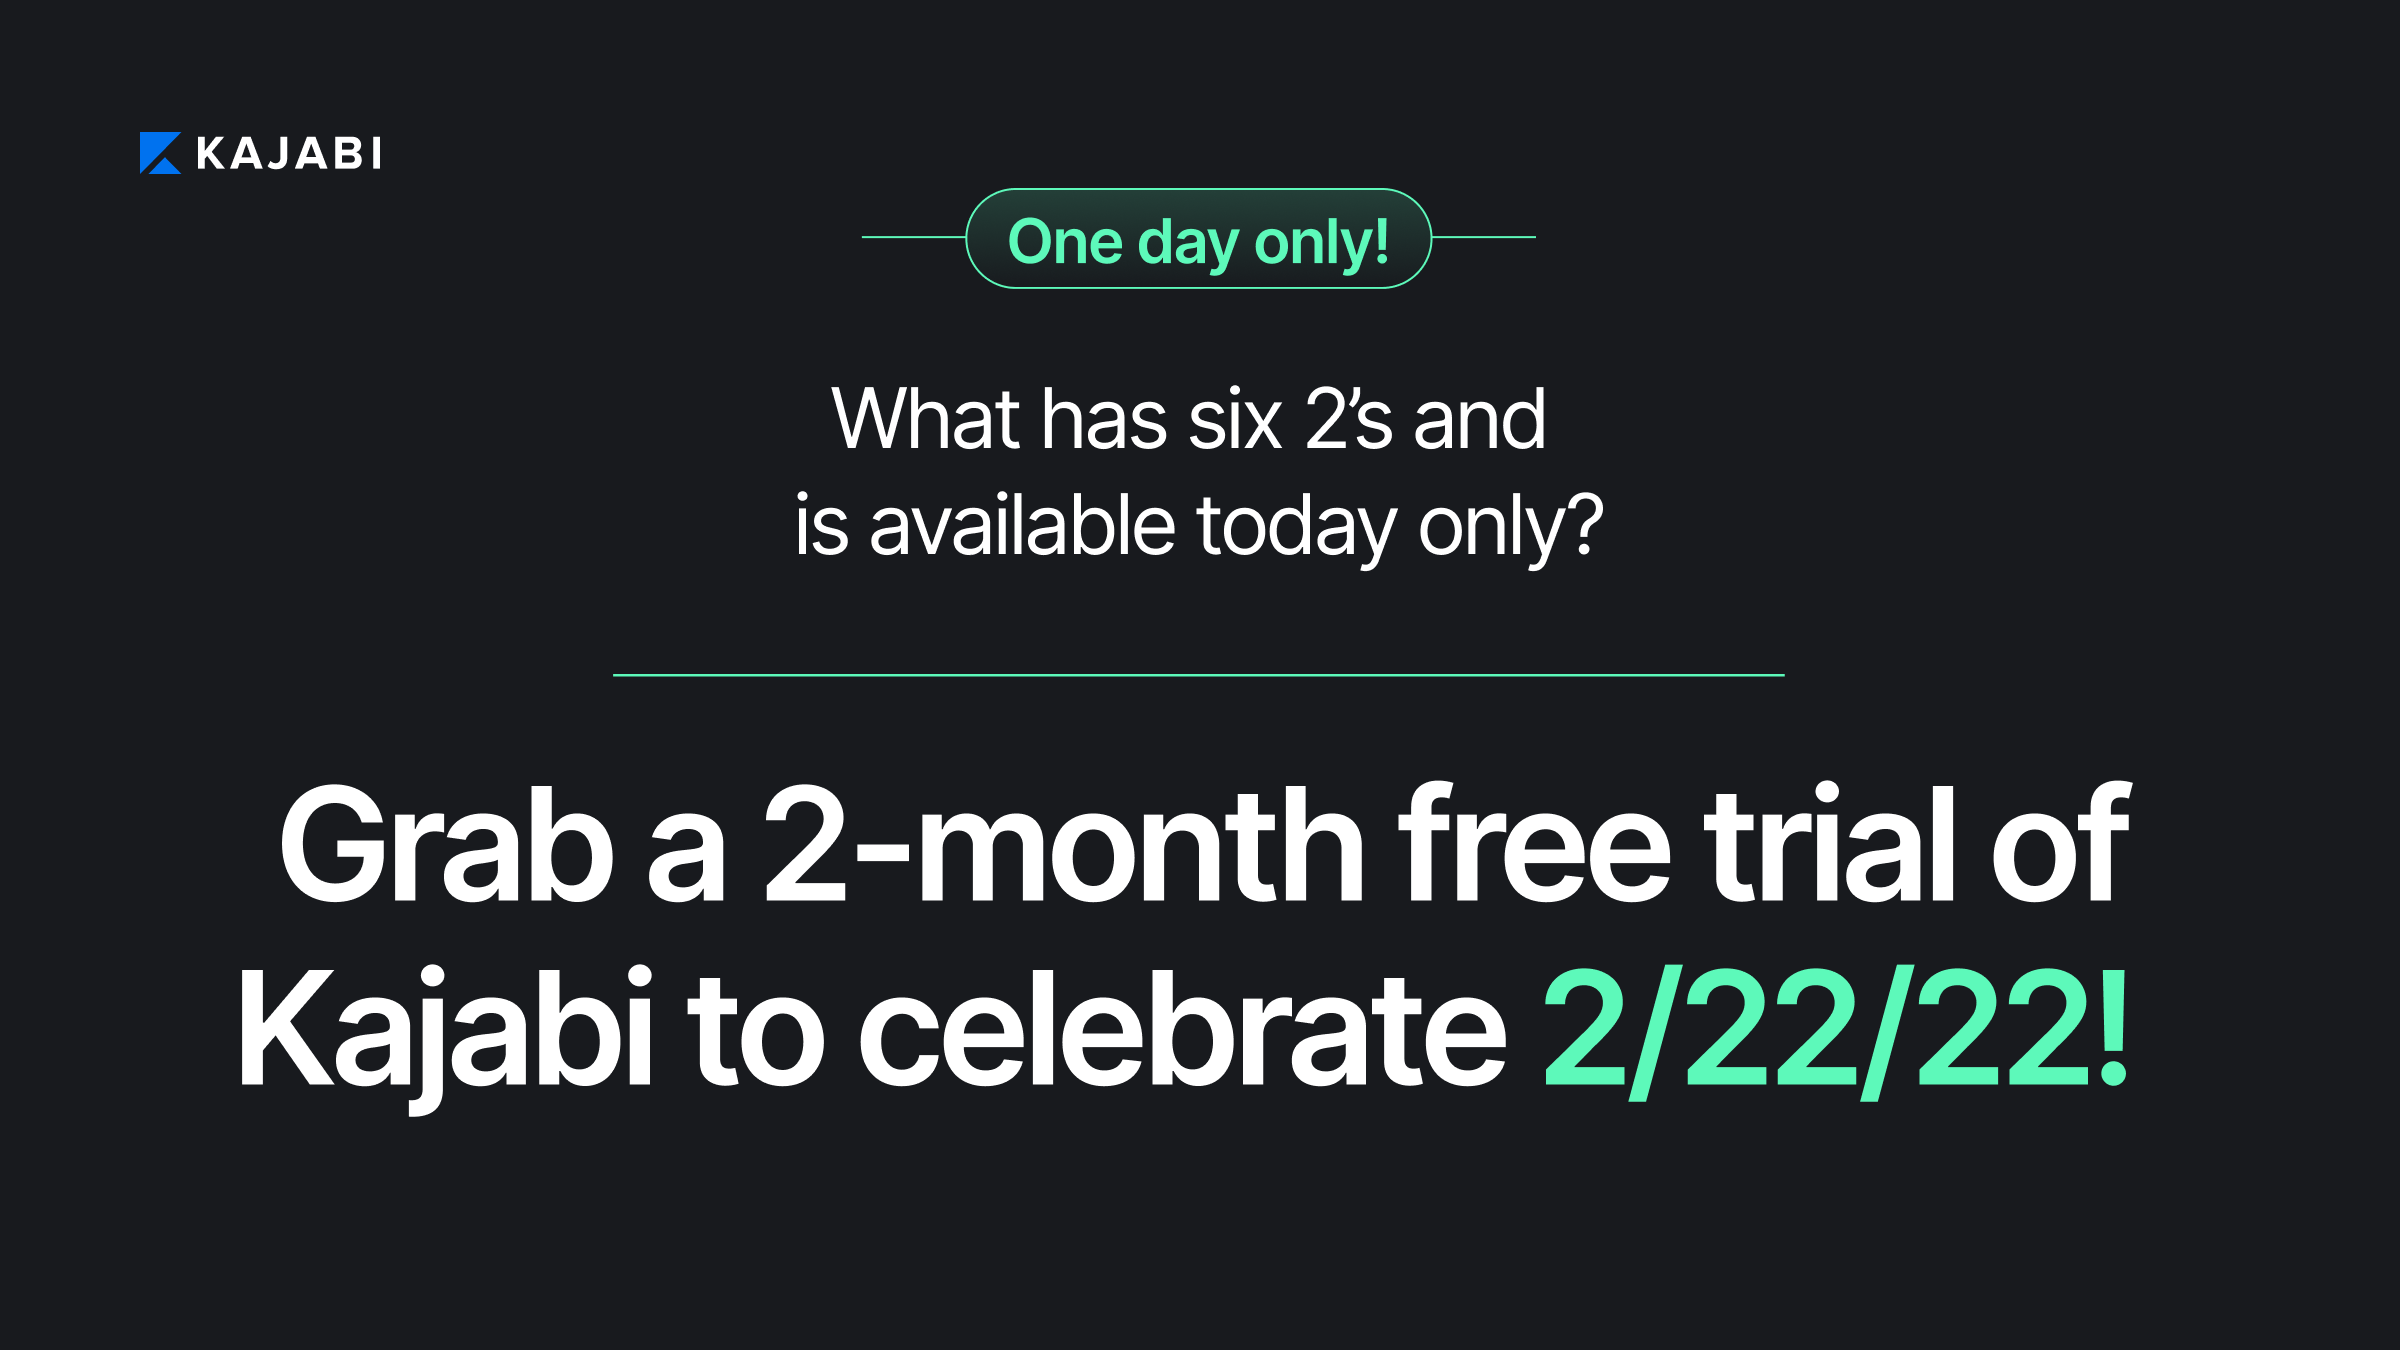 What has six 2's and is available today only? Grab a 2-mont free trial of Kajabi to celebrate 2/22/22!